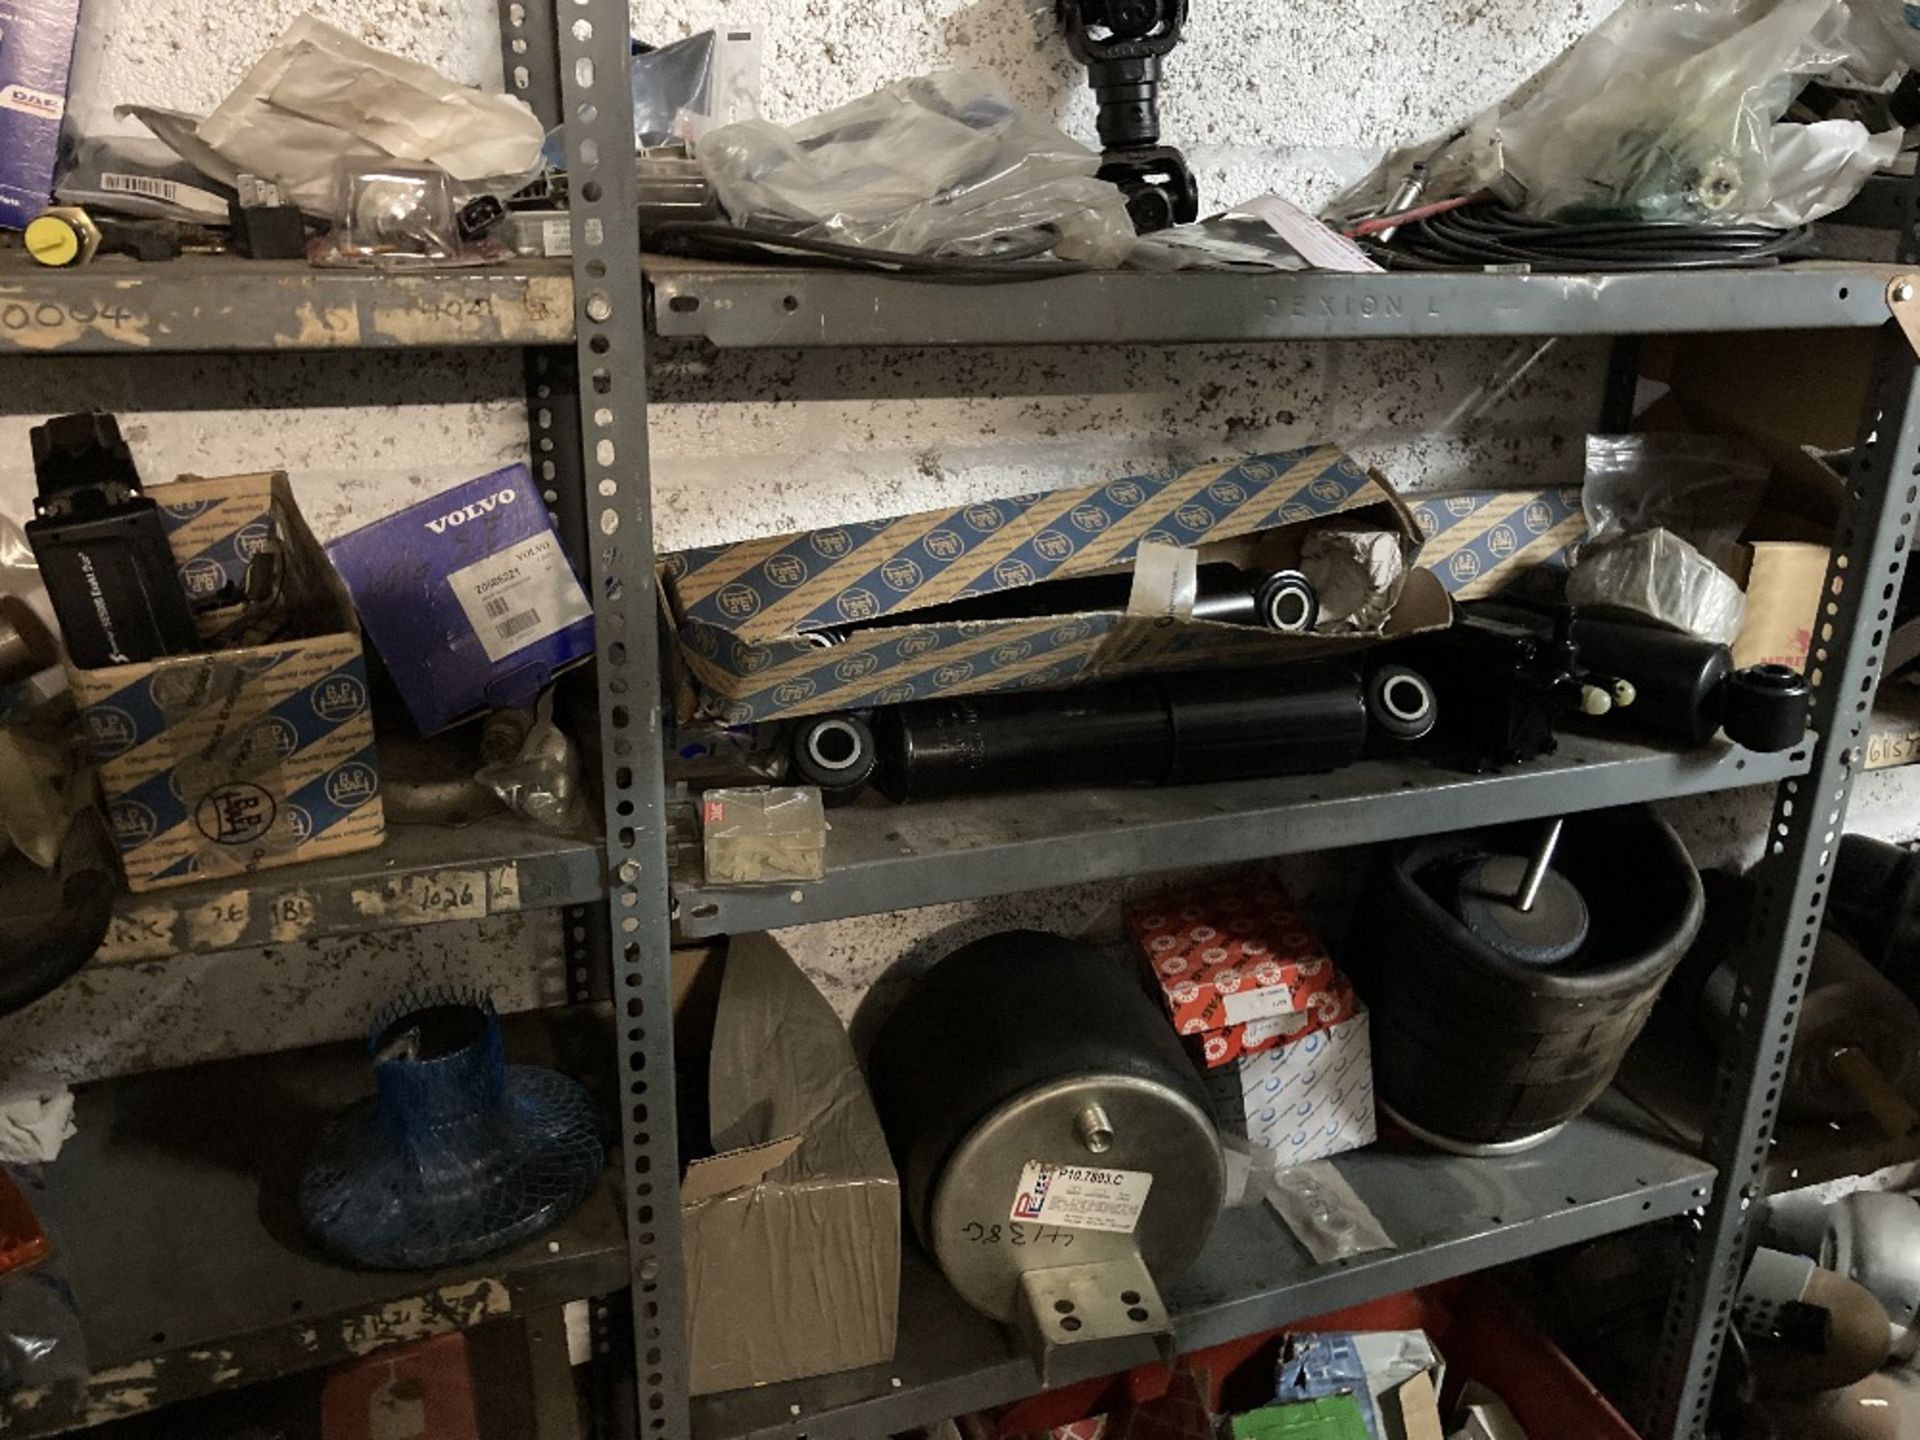 Content of Parts Room Containing Large Quantity of Various Parts & Components - Image 33 of 150